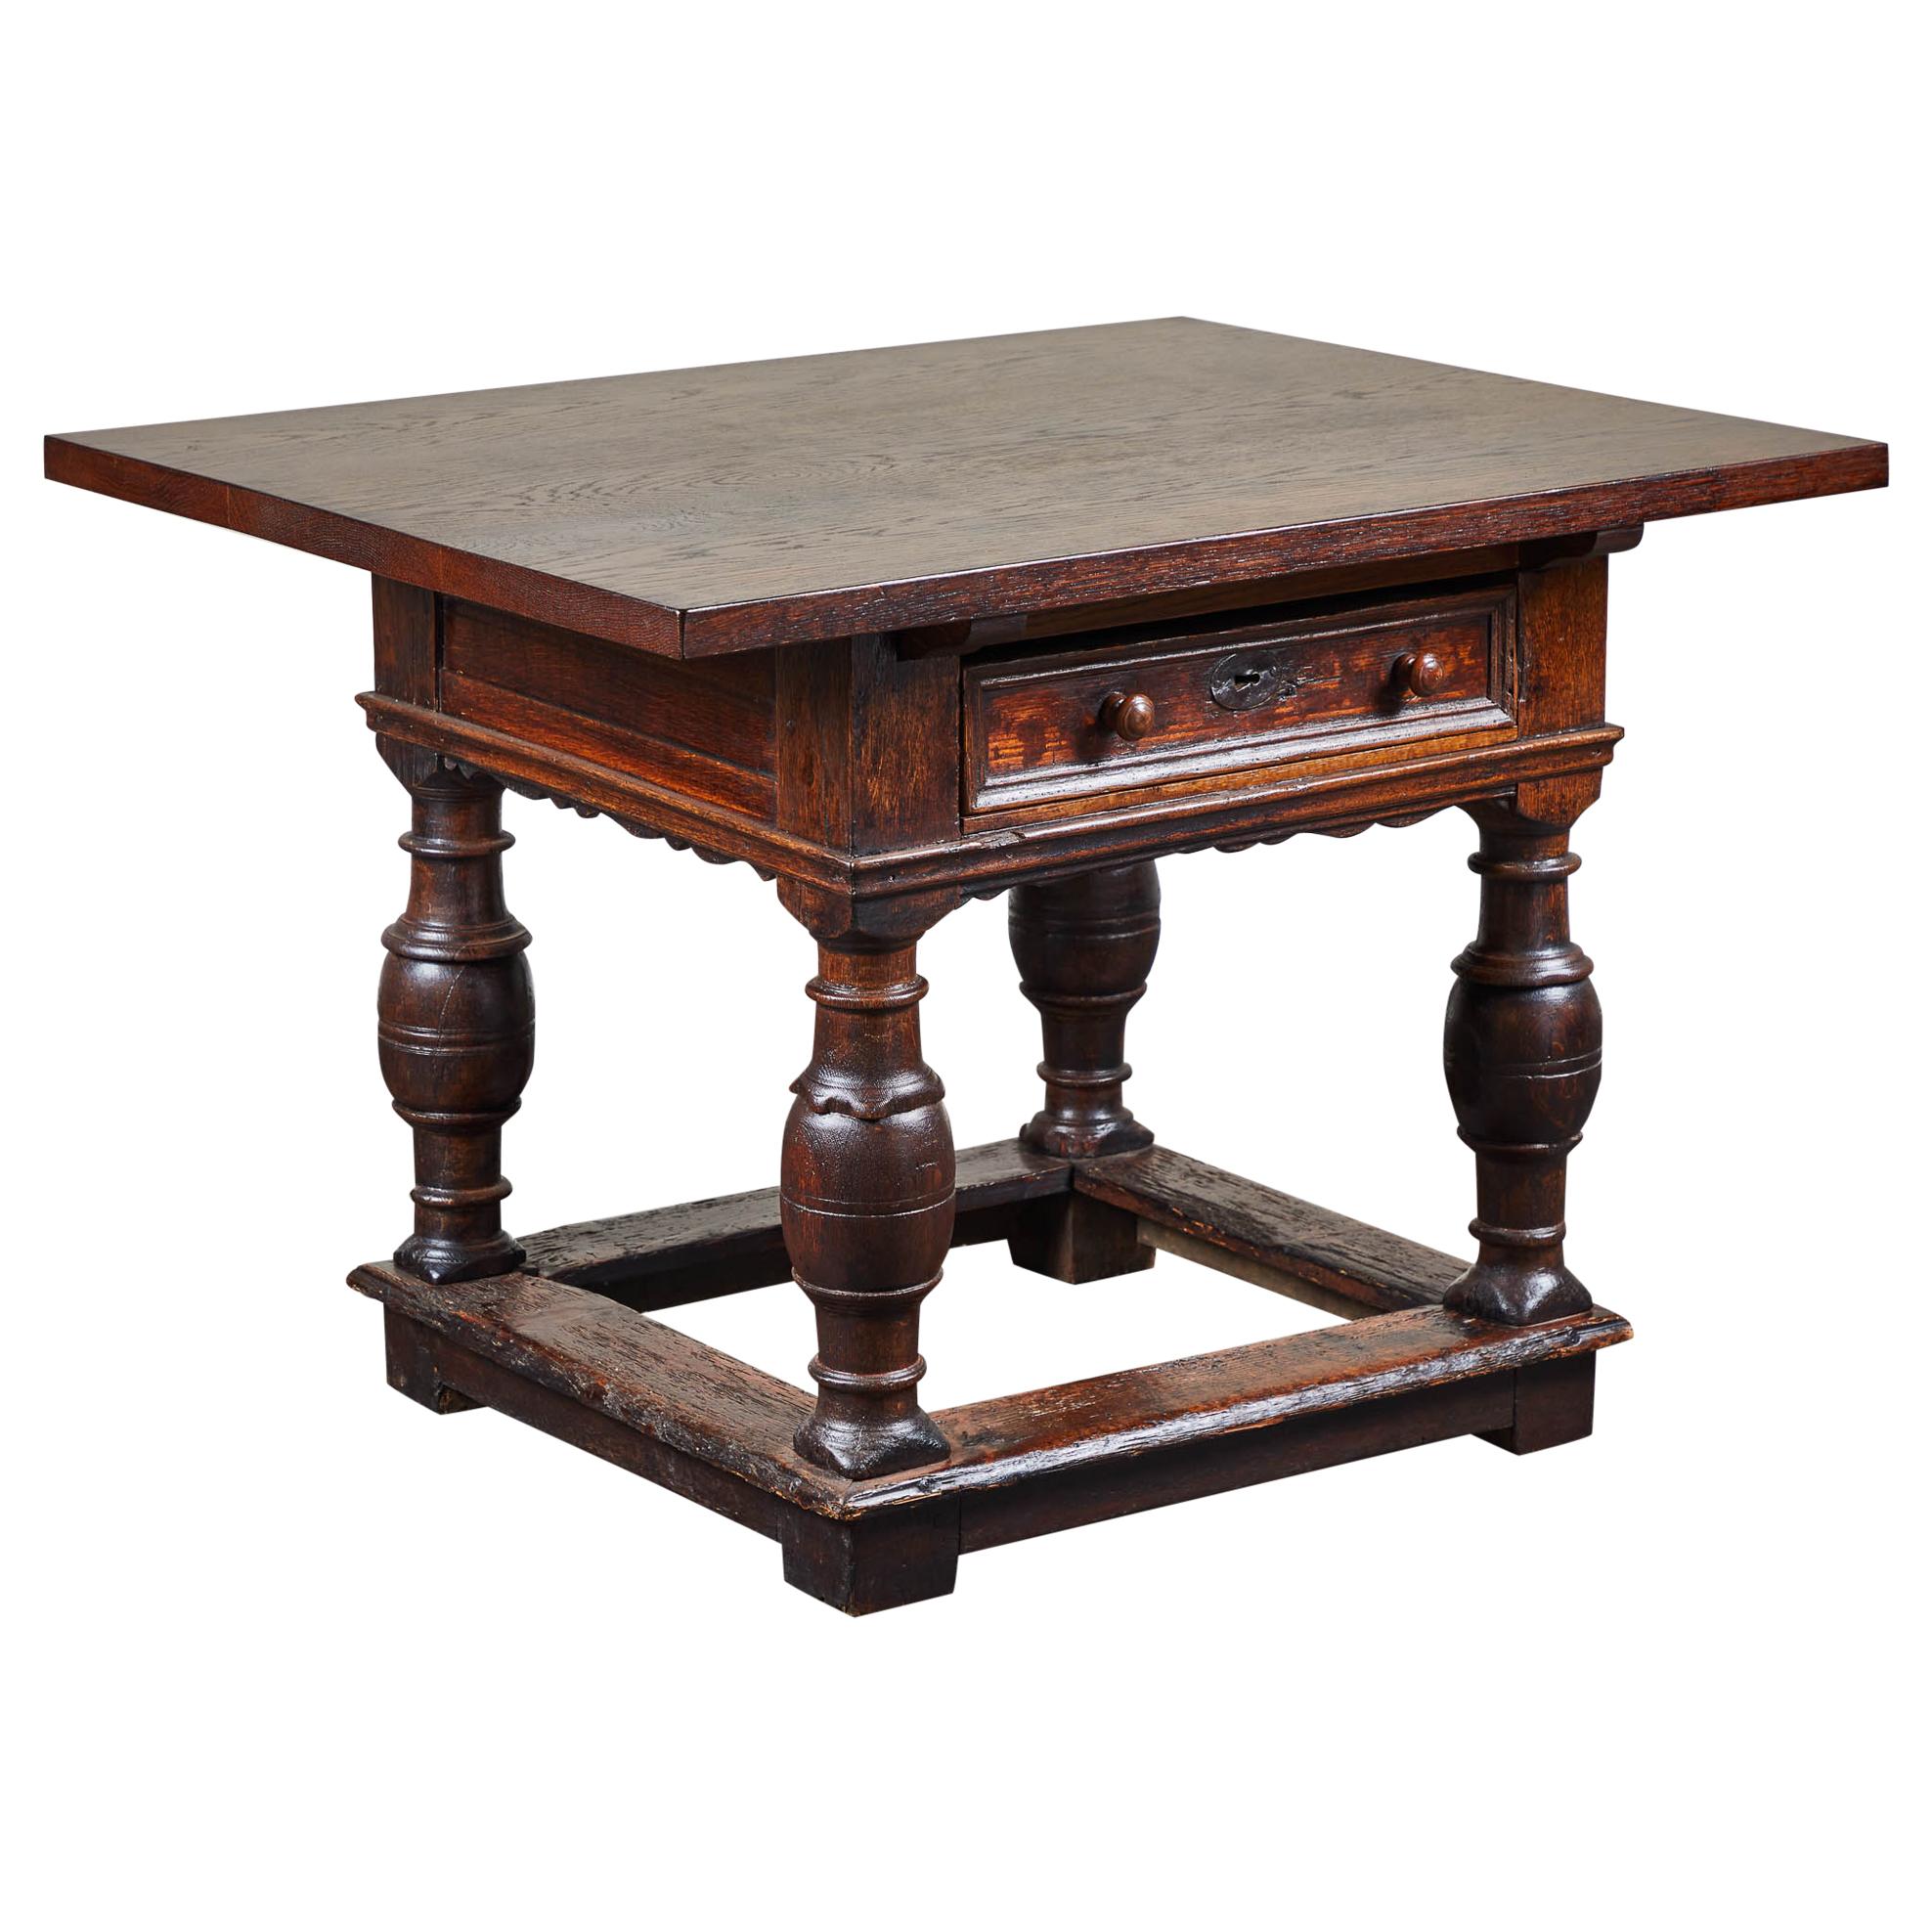 18th Century Danish Baroque Table with Turned Legs For Sale